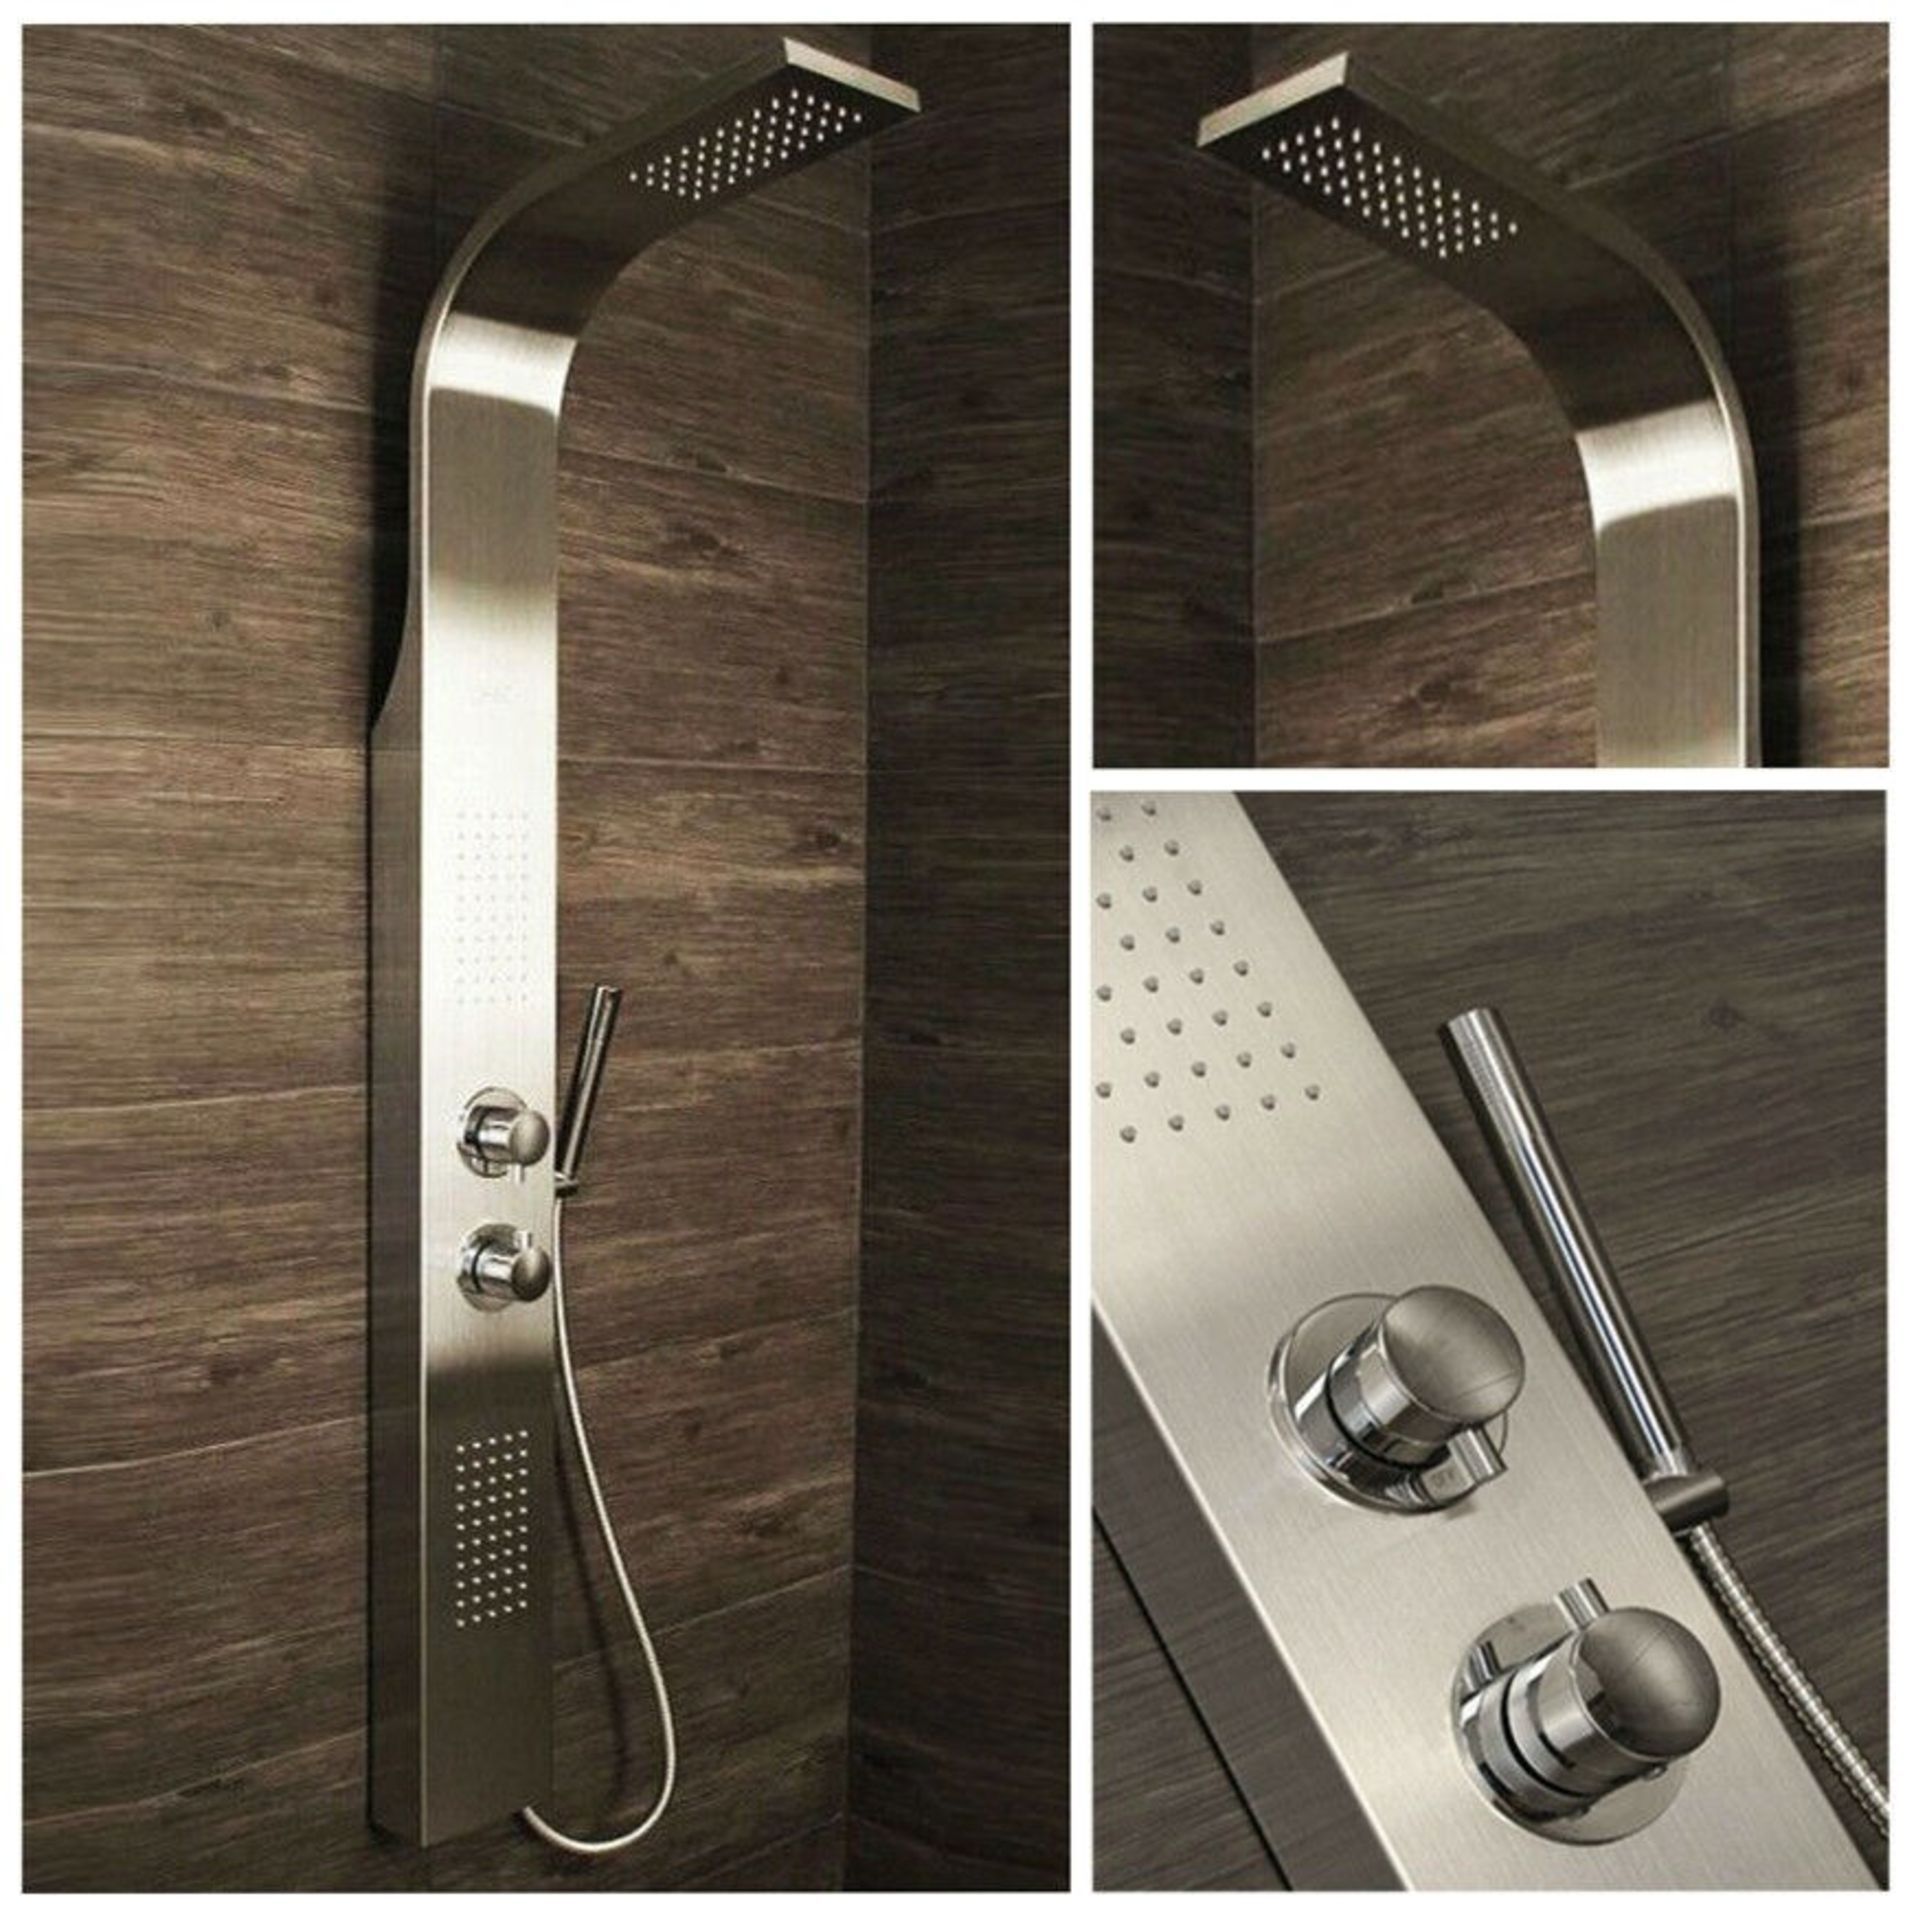 (MG40) Shower Panel Column Tower w/ Body Jets Waterfall Bathroom Thermostatic Manual. Featuri... - Image 3 of 3